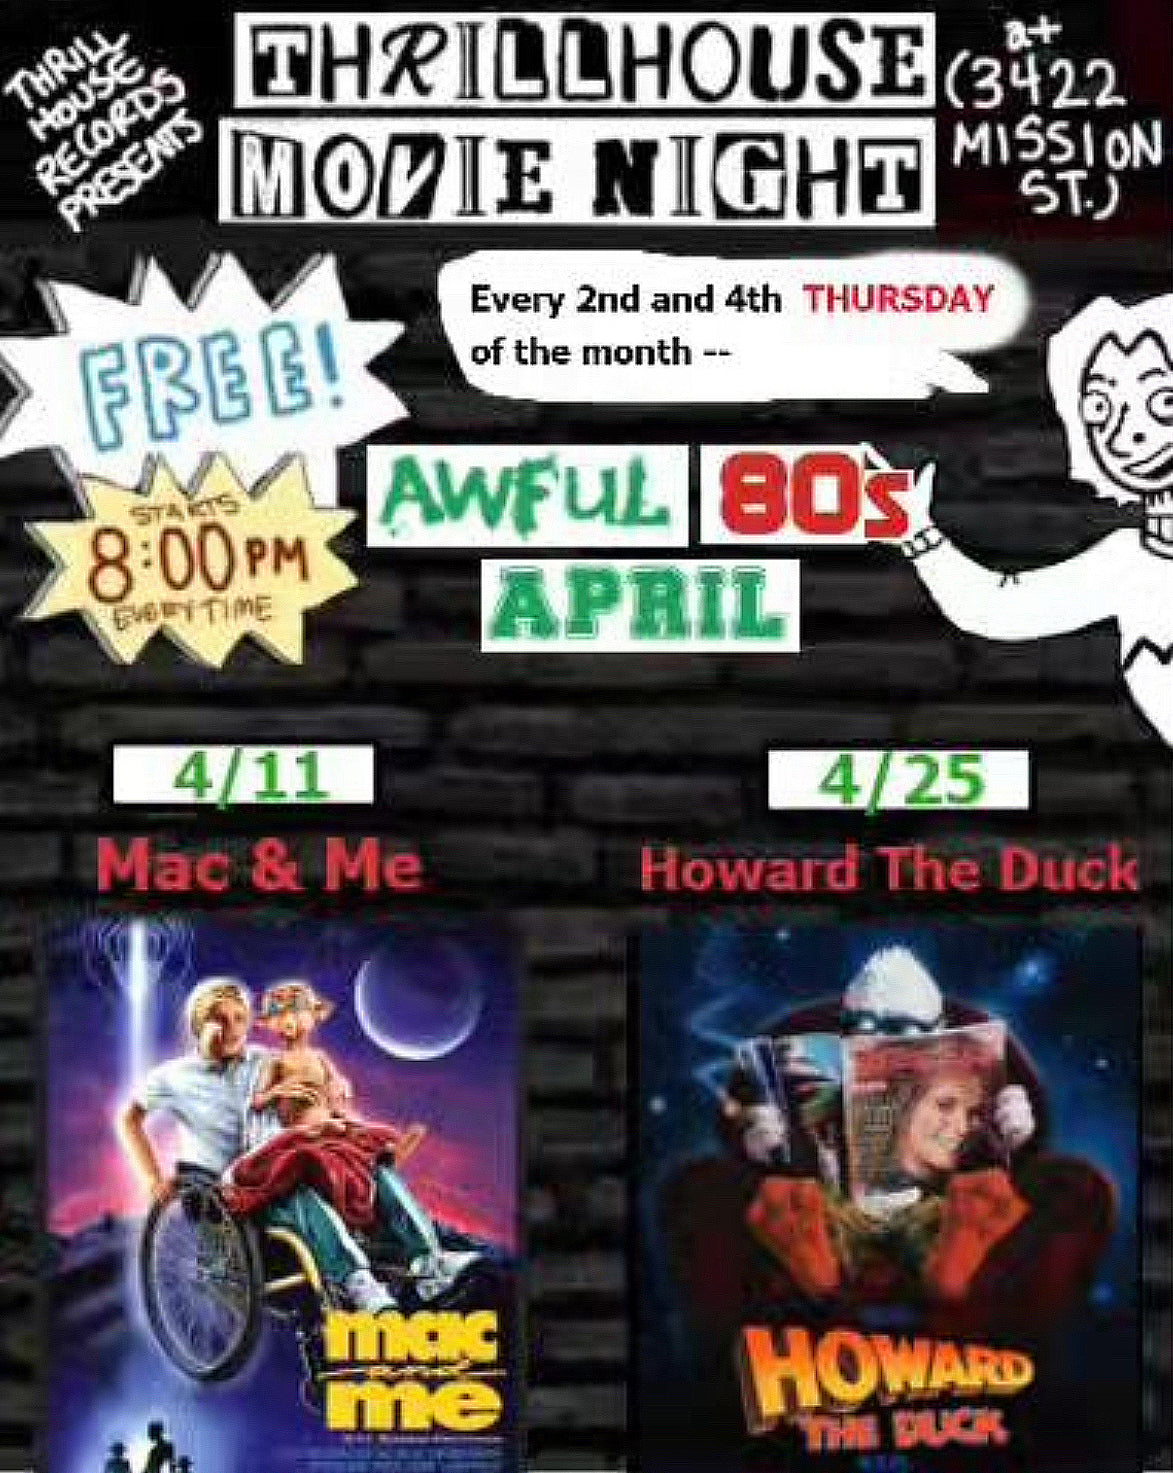 THRILLHOUSE MOVIE NIGHT!  AWFUL 80'S! HOWARD THE DUCK!